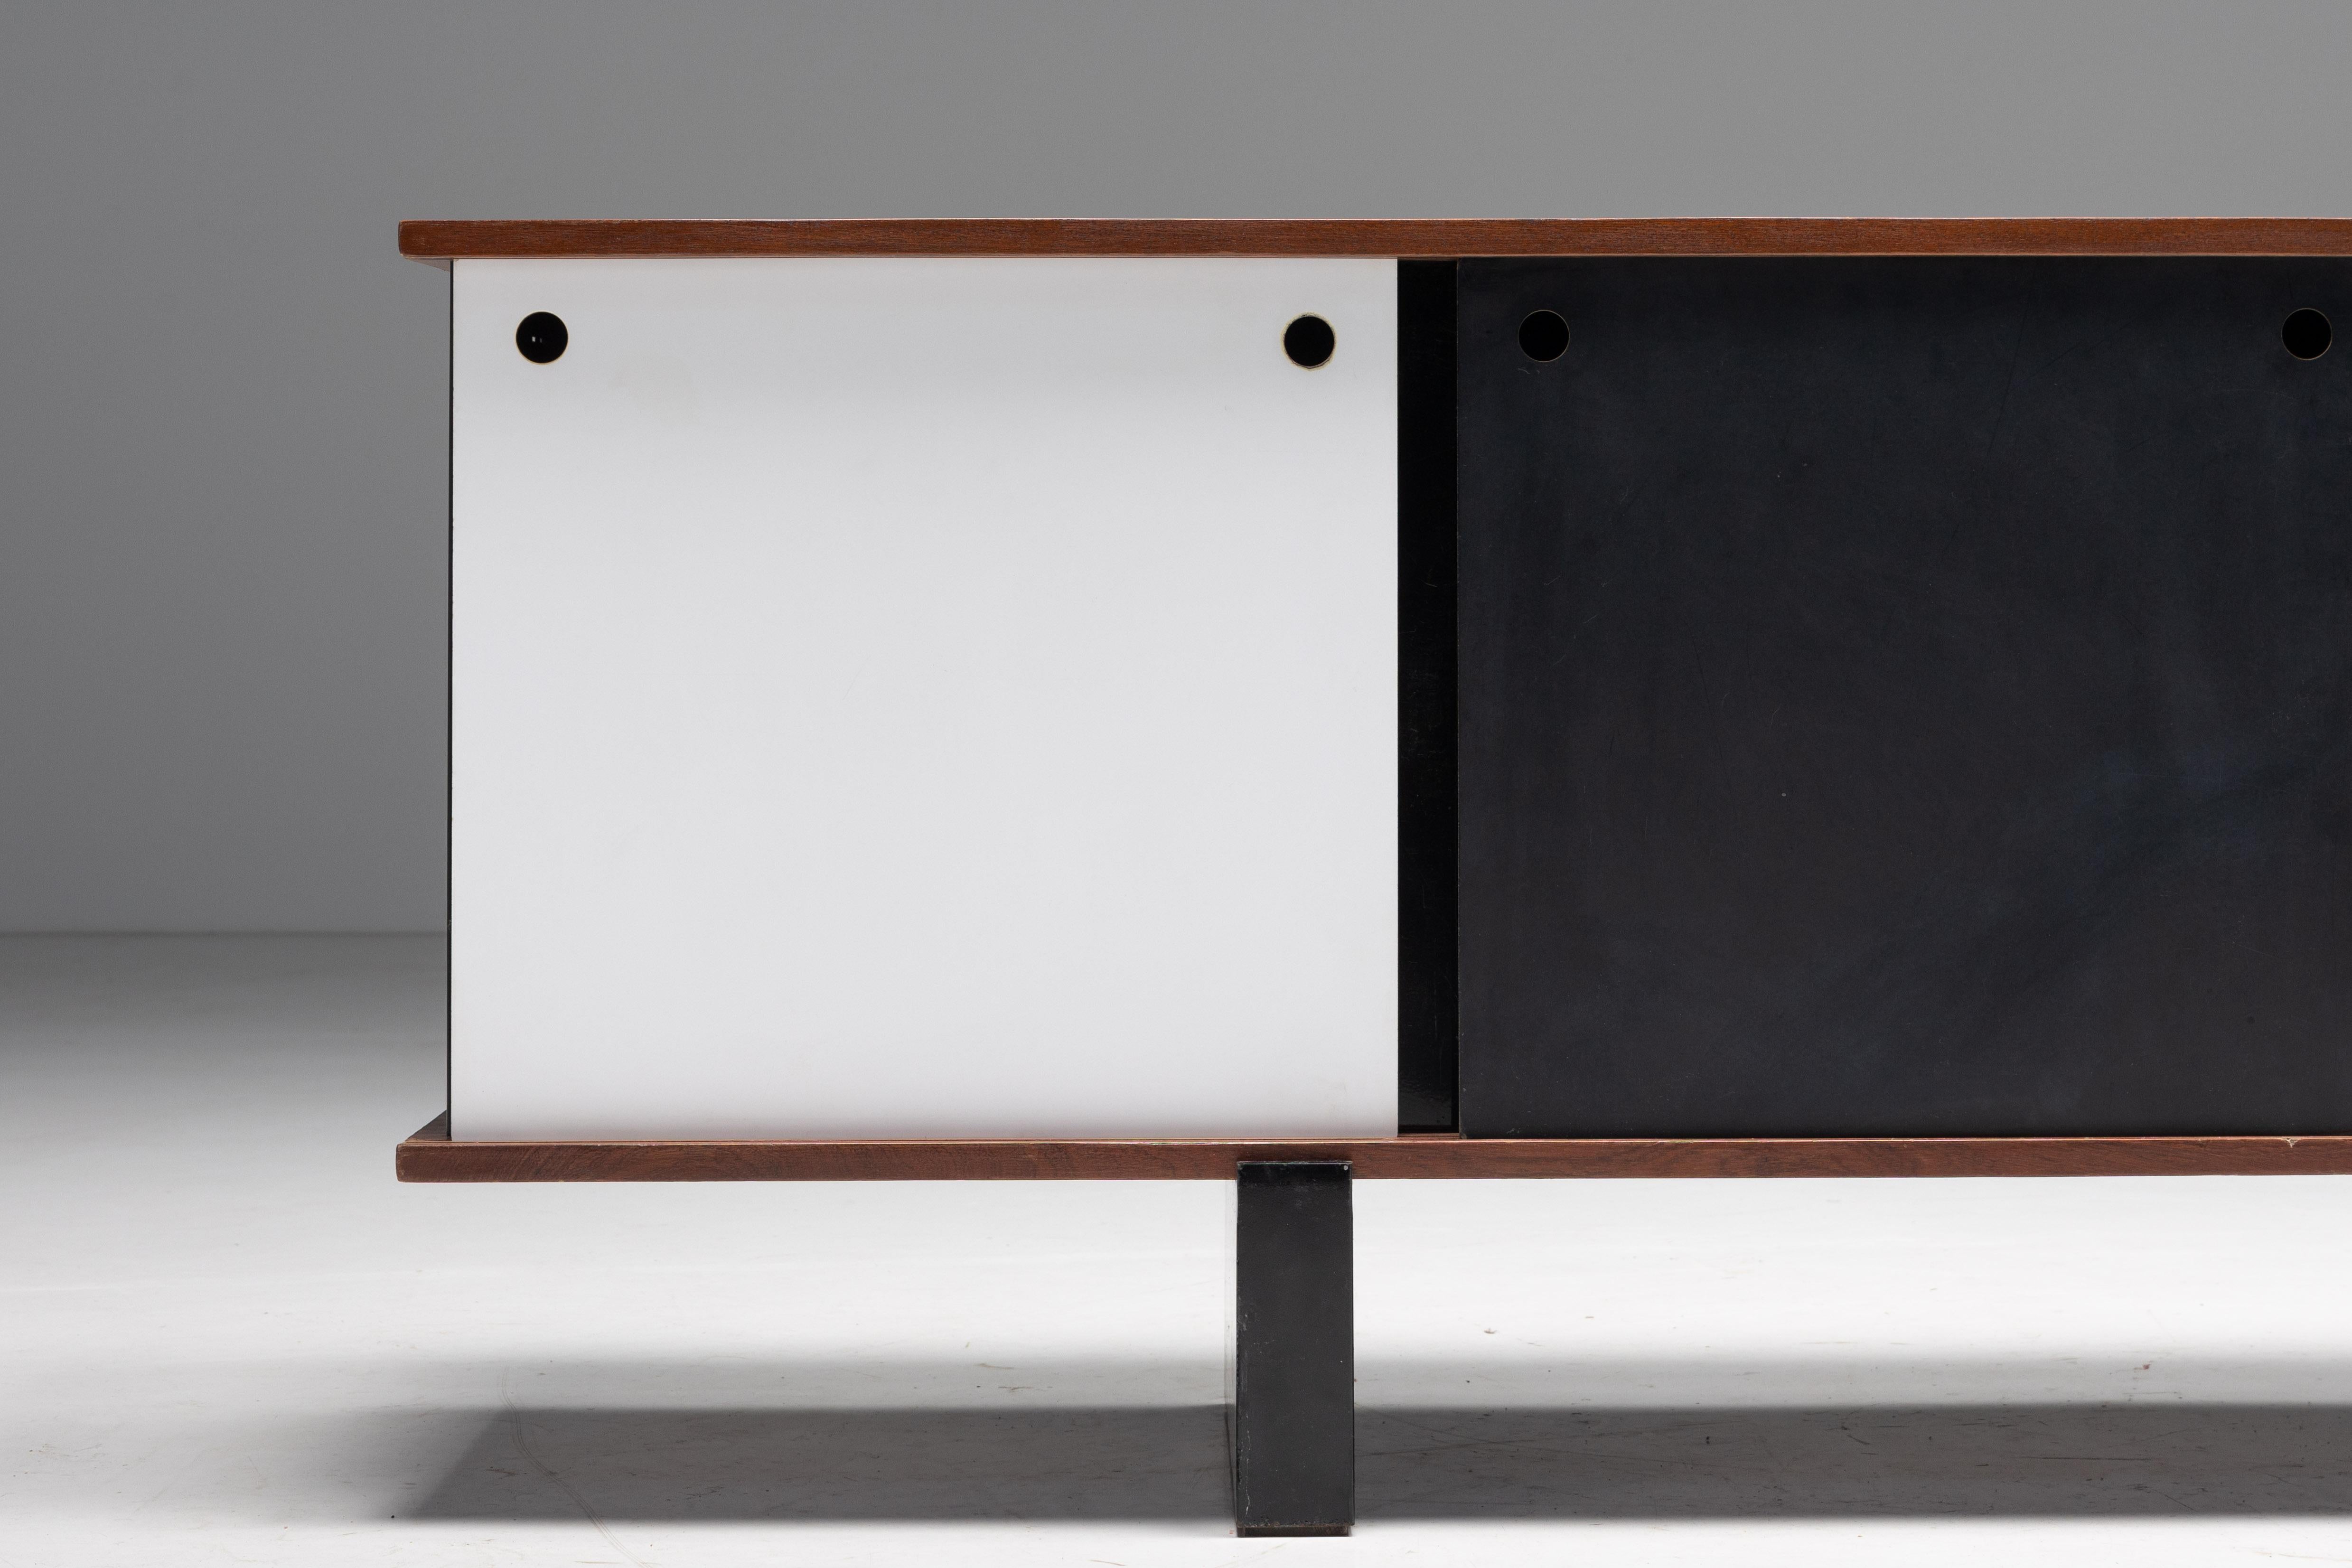 Minimalism; Modernism; Midcentury Modern; Simplicity; Charlotte Perriand; Cité Cansado; 1958; 1950s; France; 

Sideboard 'Bloc' by Charlotte Perriand, a timeless piece designed for Cité Cansado. Composed of sturdy coreboard shelves veneered in a